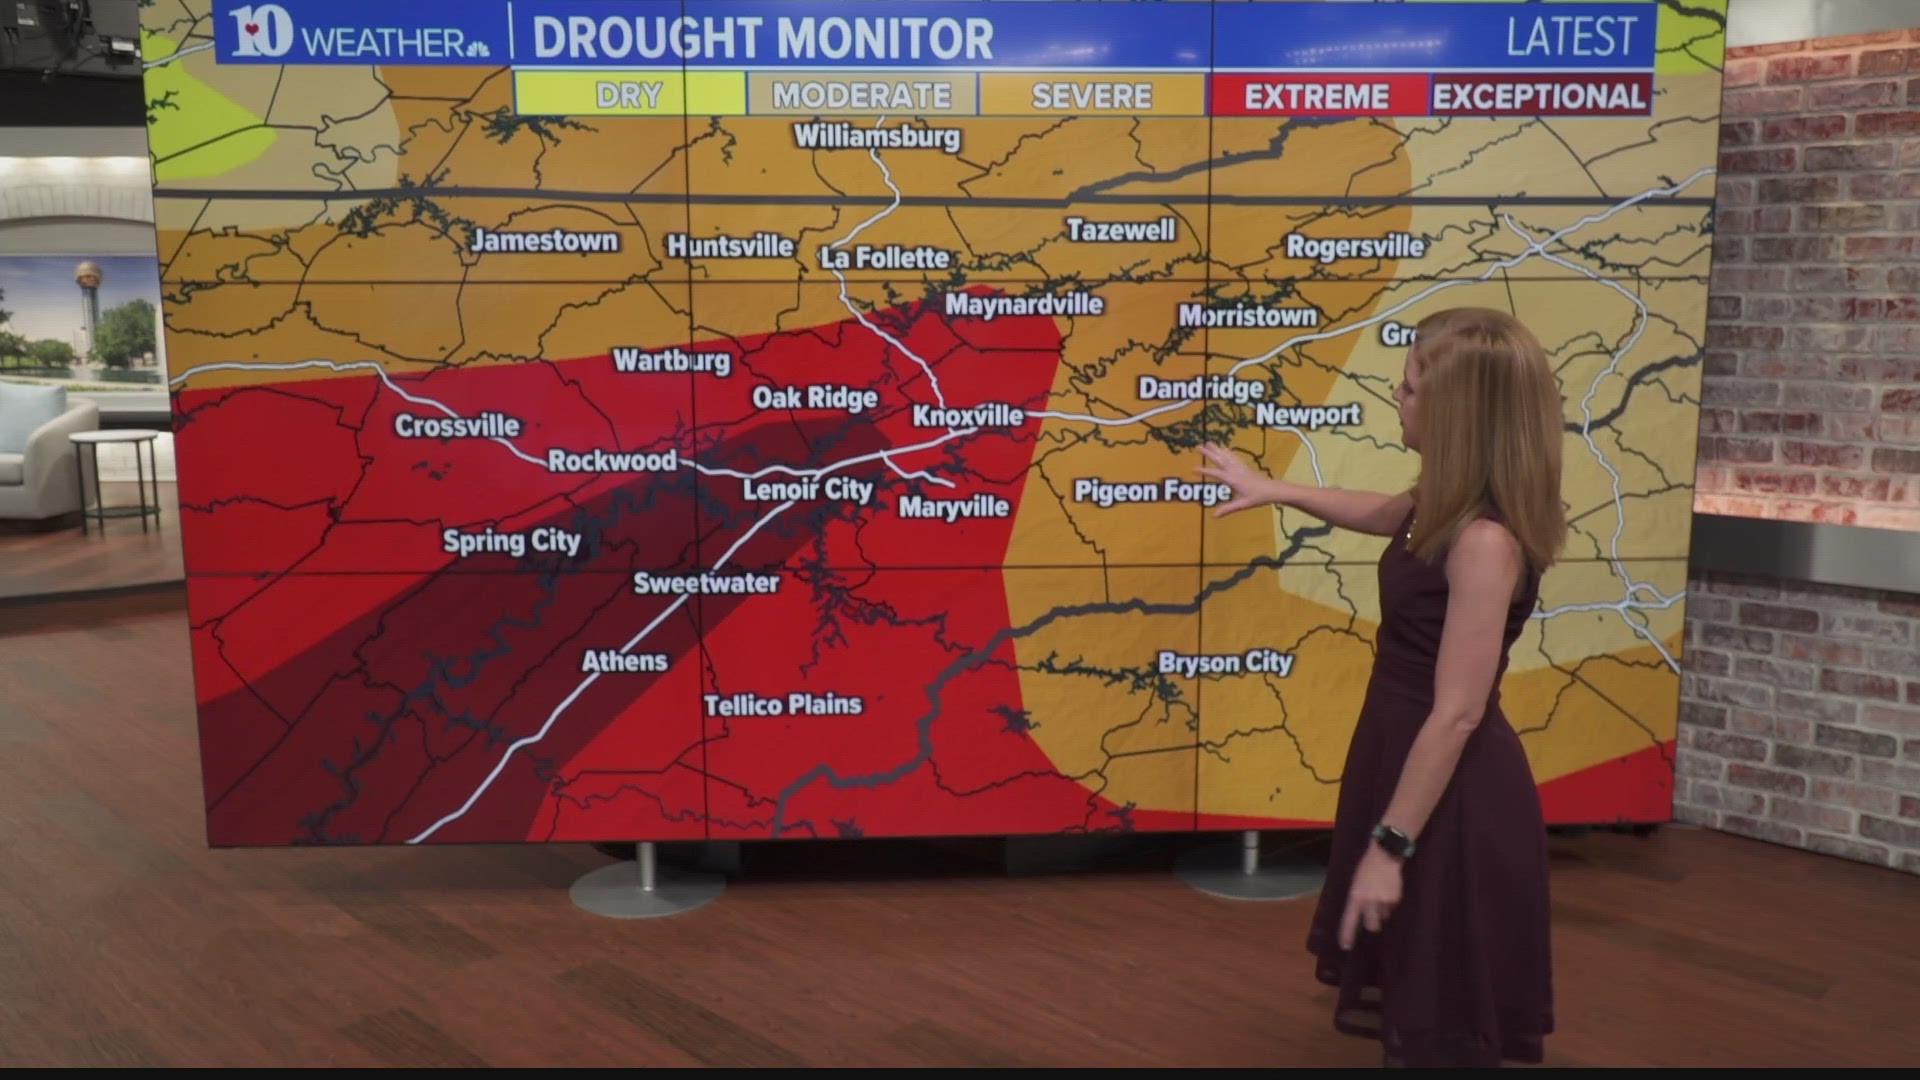 Meteorologist Cassie Nall tracked our dry conditions as the new drought monitor was released today.